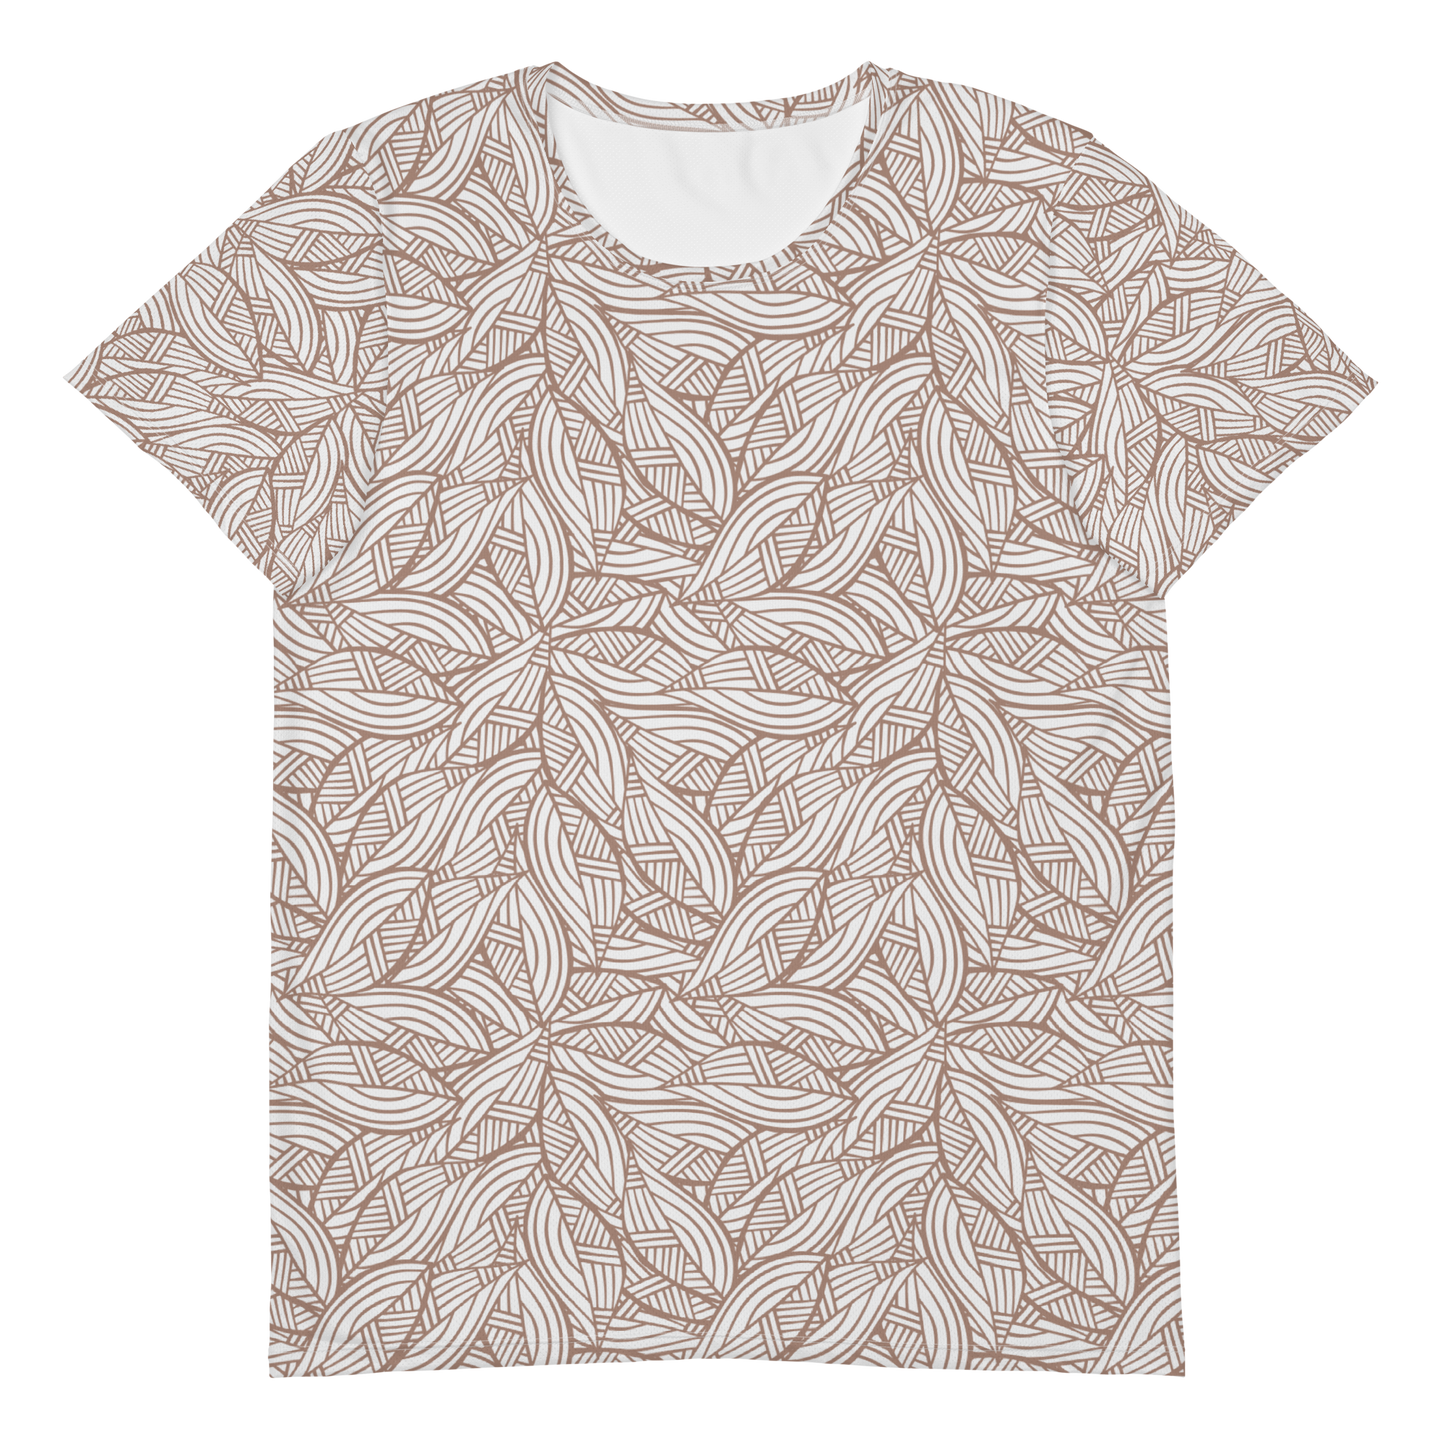 Colorful Fall Leaves | Seamless Patterns | All-Over Print Men's Athletic T-Shirt - #3